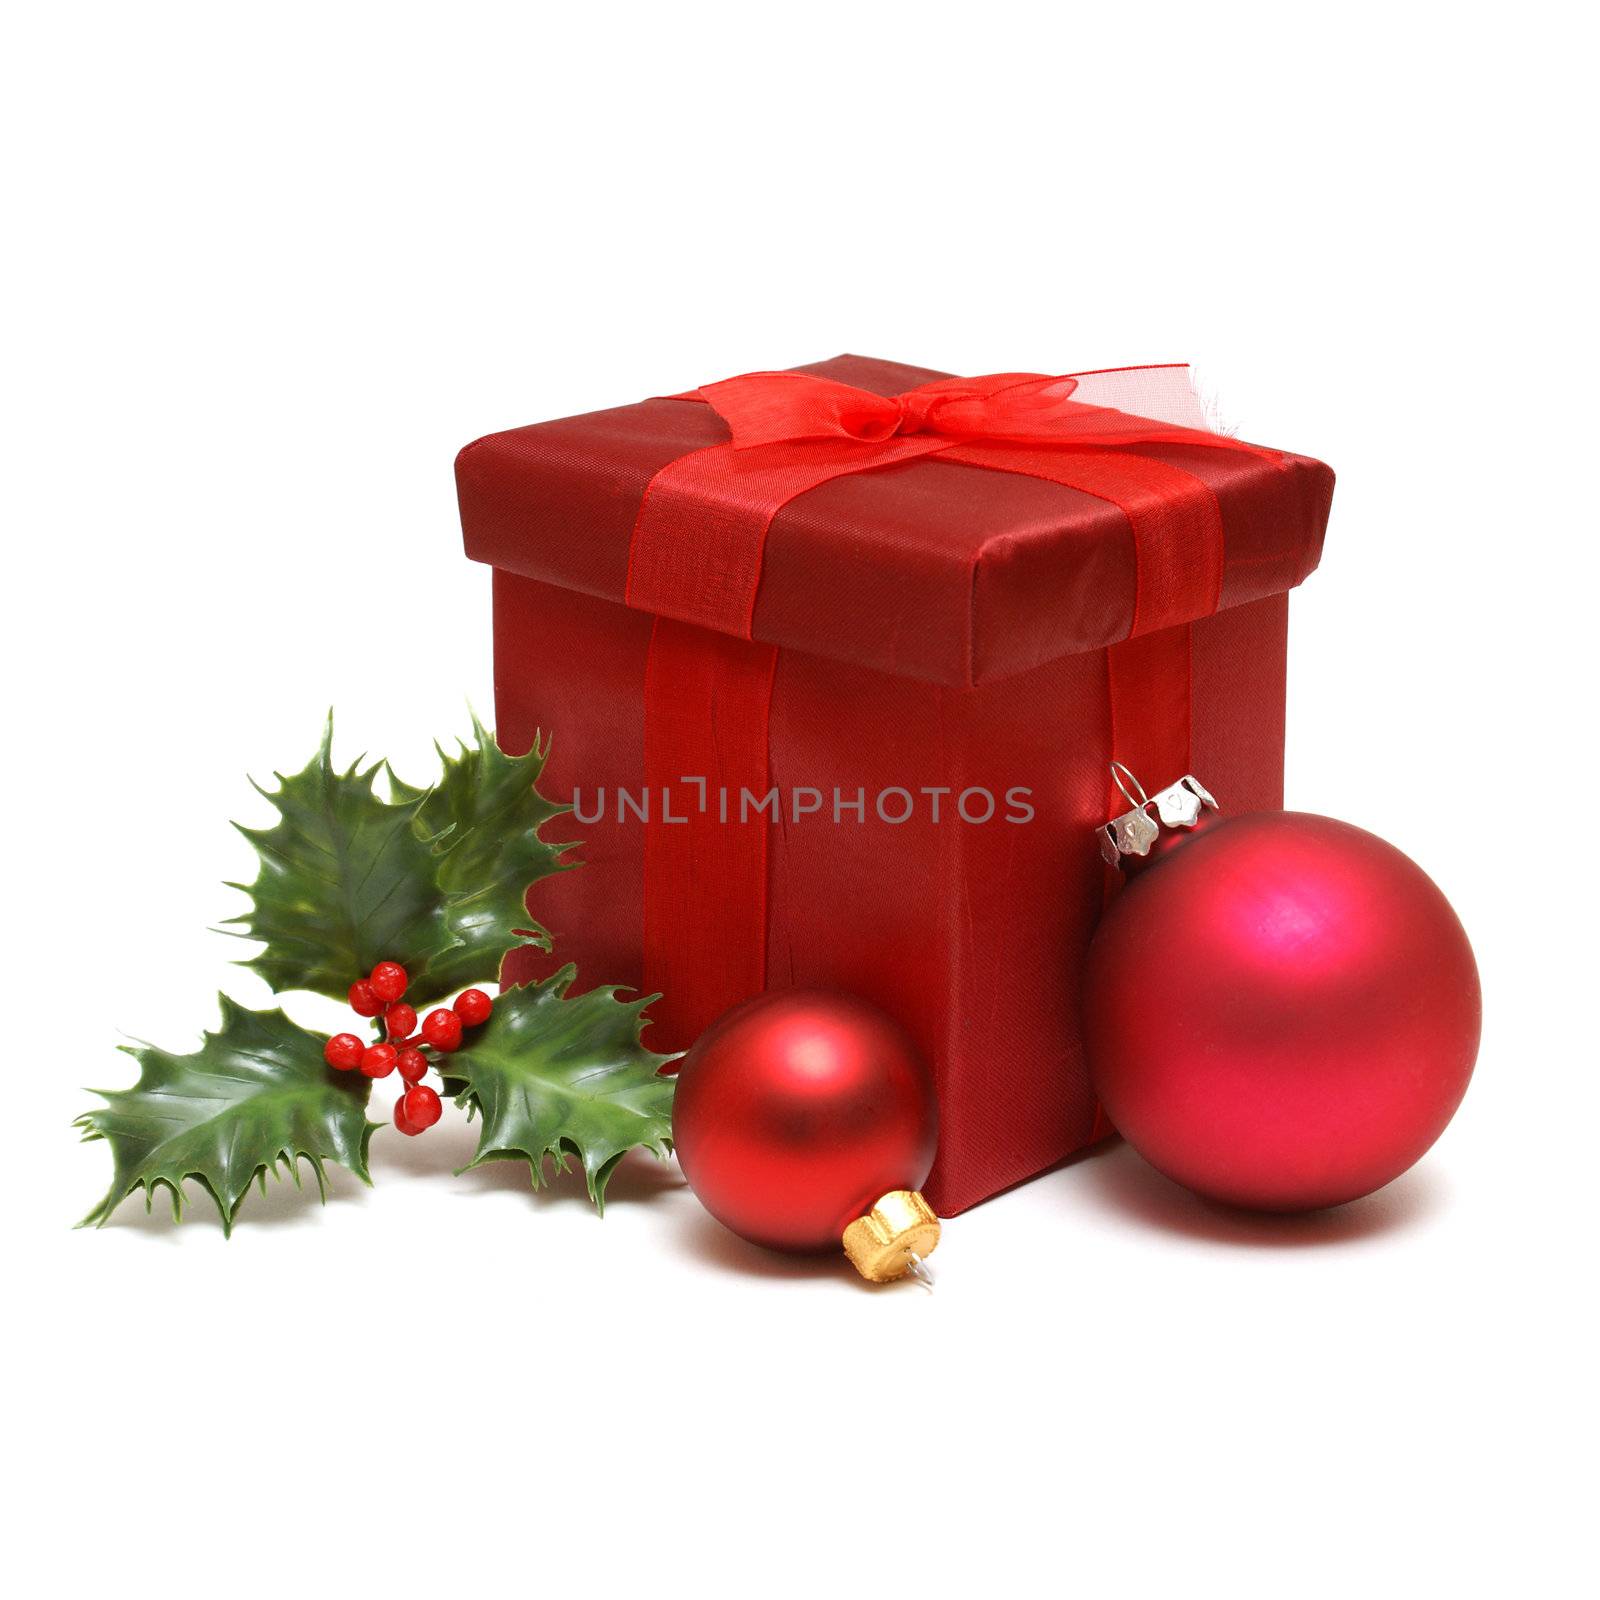 An isolated gift box for the holiday season.